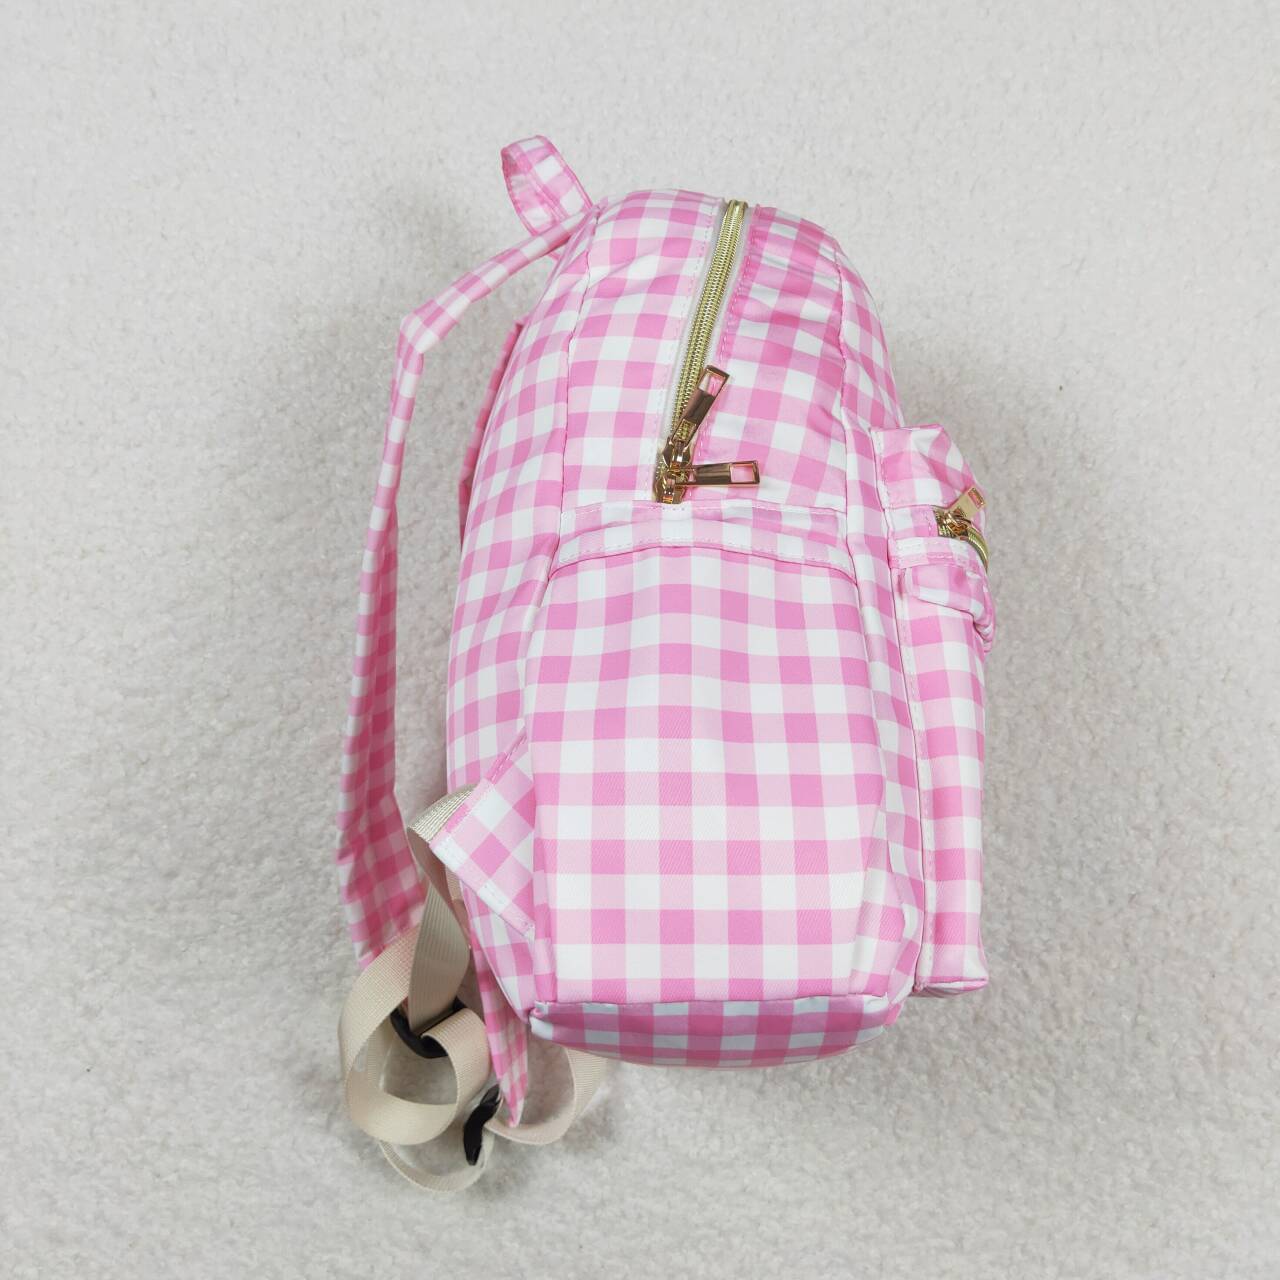 BA0086 Pink and white plaid lace backpack